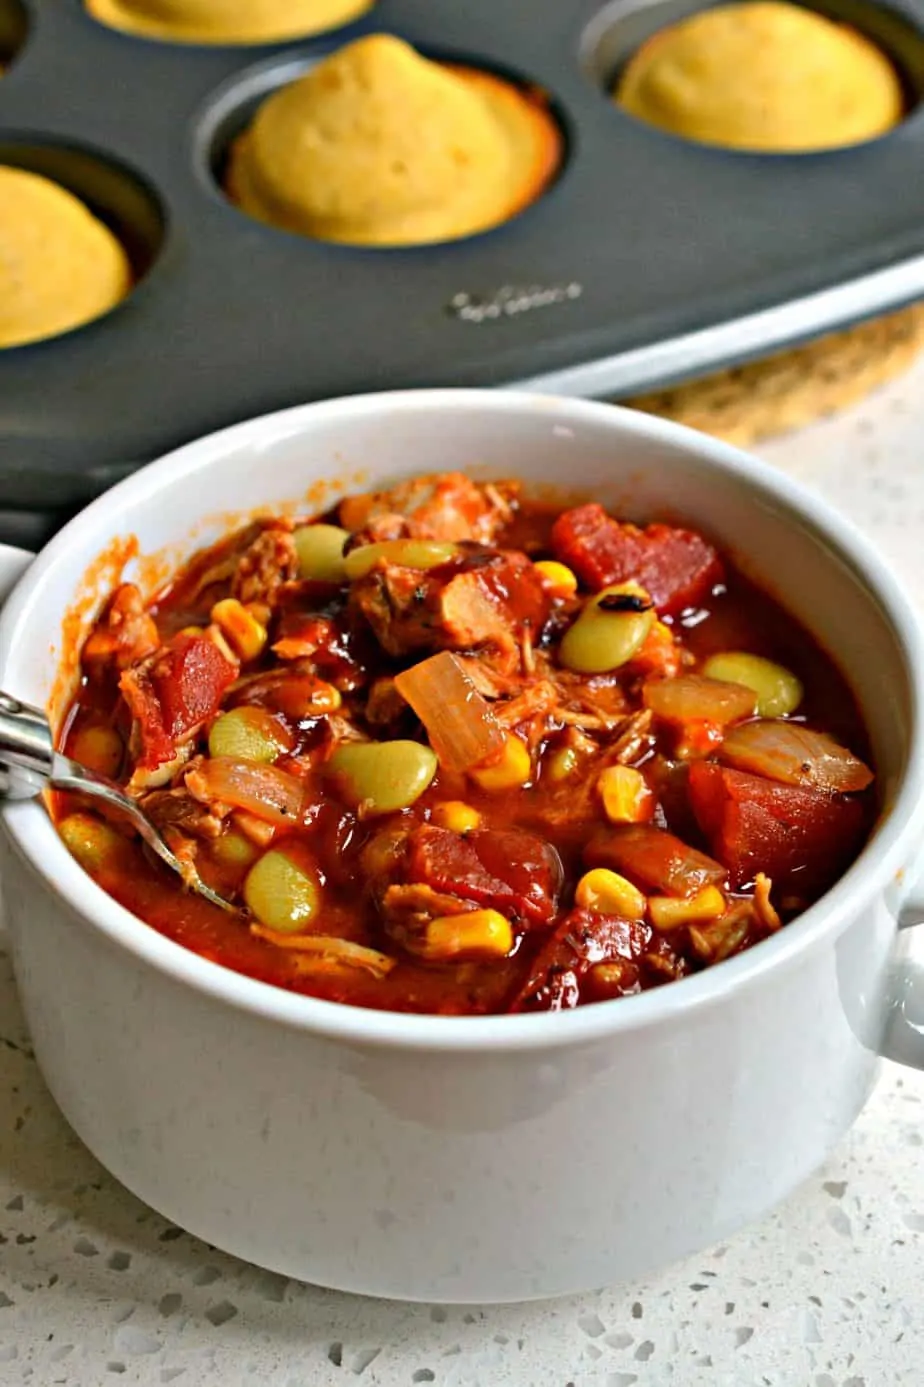 Brunswick Stew has a tangy sweet broth seasoned with barbecue sauce and a perfect blend of spices.